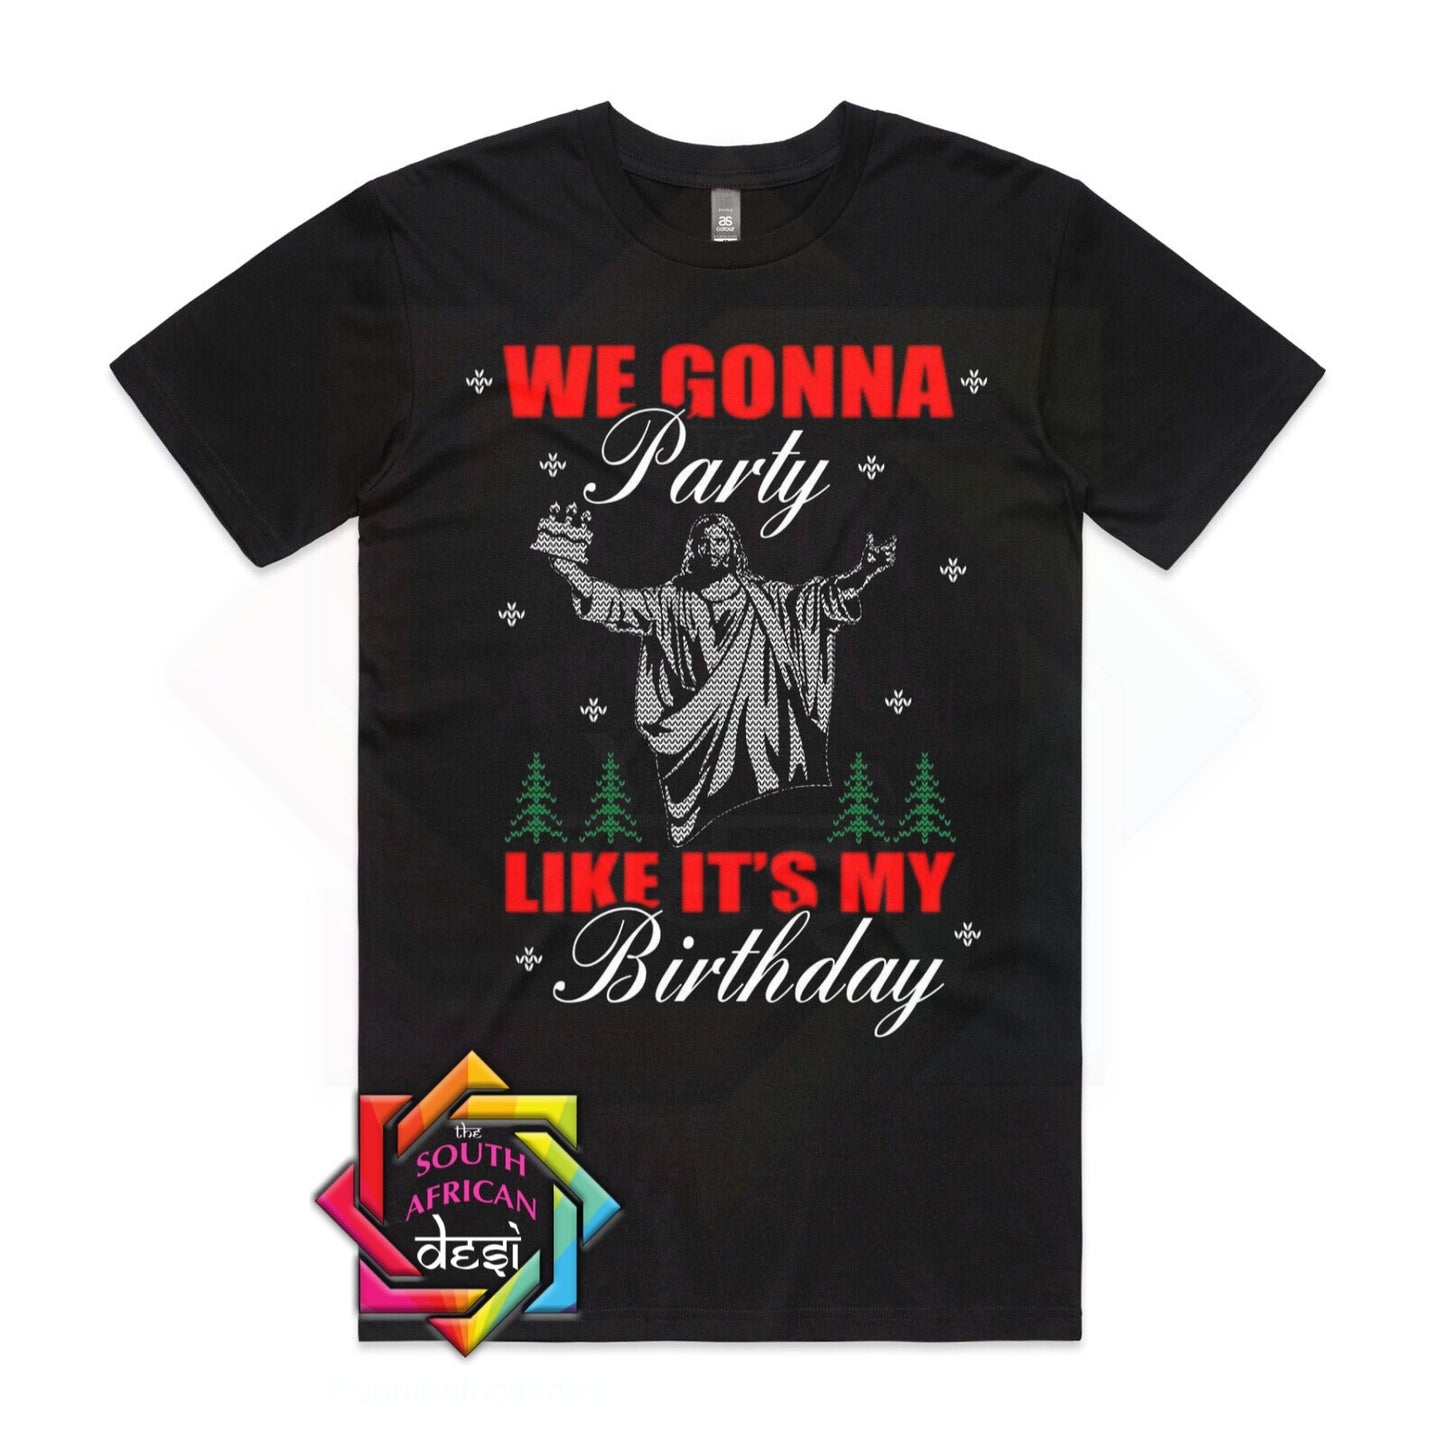 We gonna party like it's my birthday - Christmas T-shirt